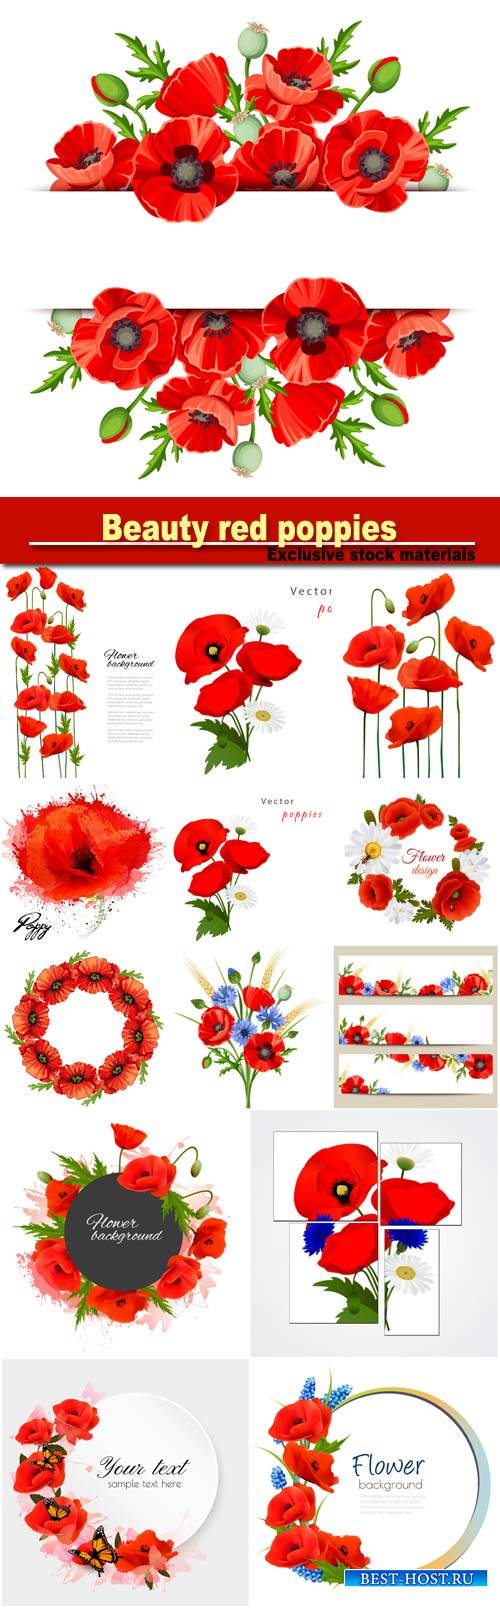 Beautiful background with beauty red poppies, vector floral